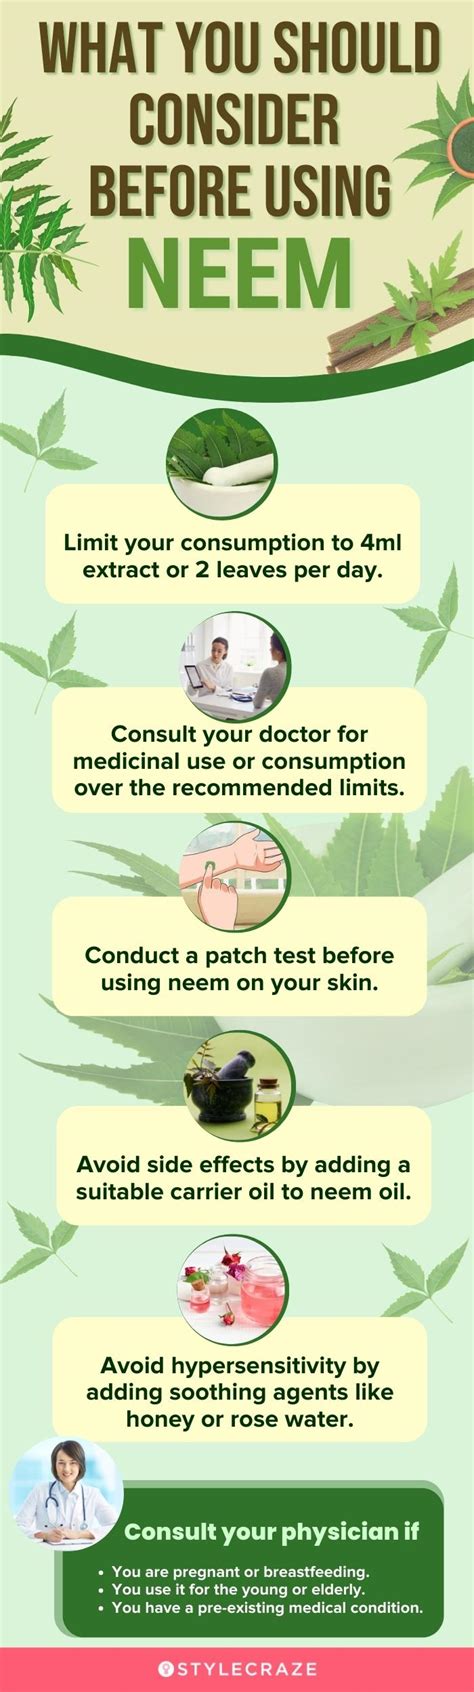 Does neem have side effects on face?